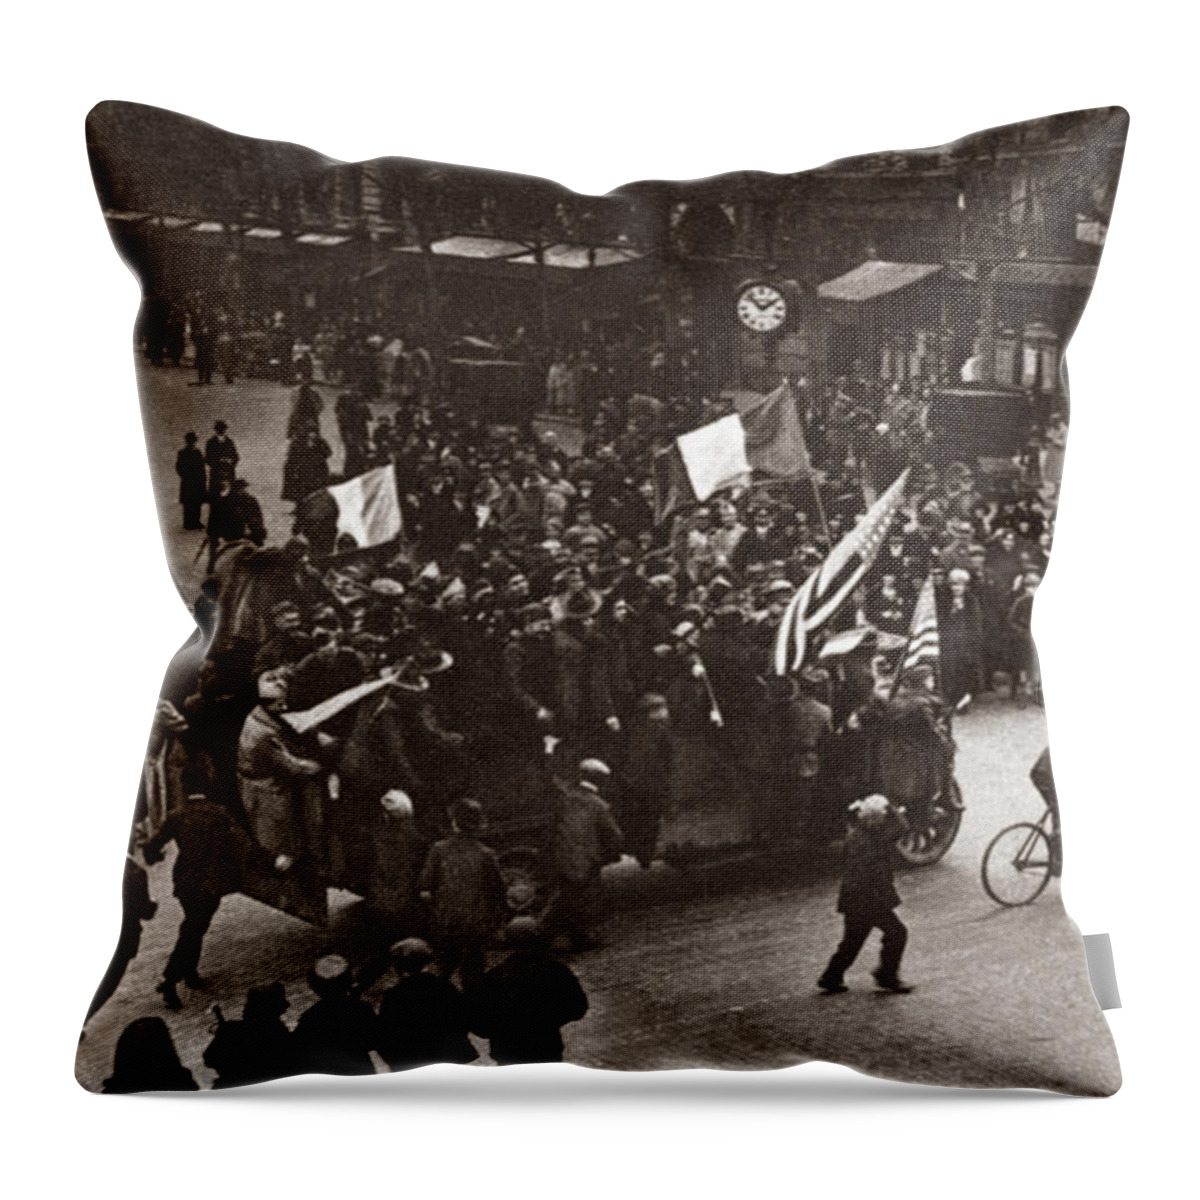 1918 Throw Pillow featuring the photograph World War I Celebration by Granger